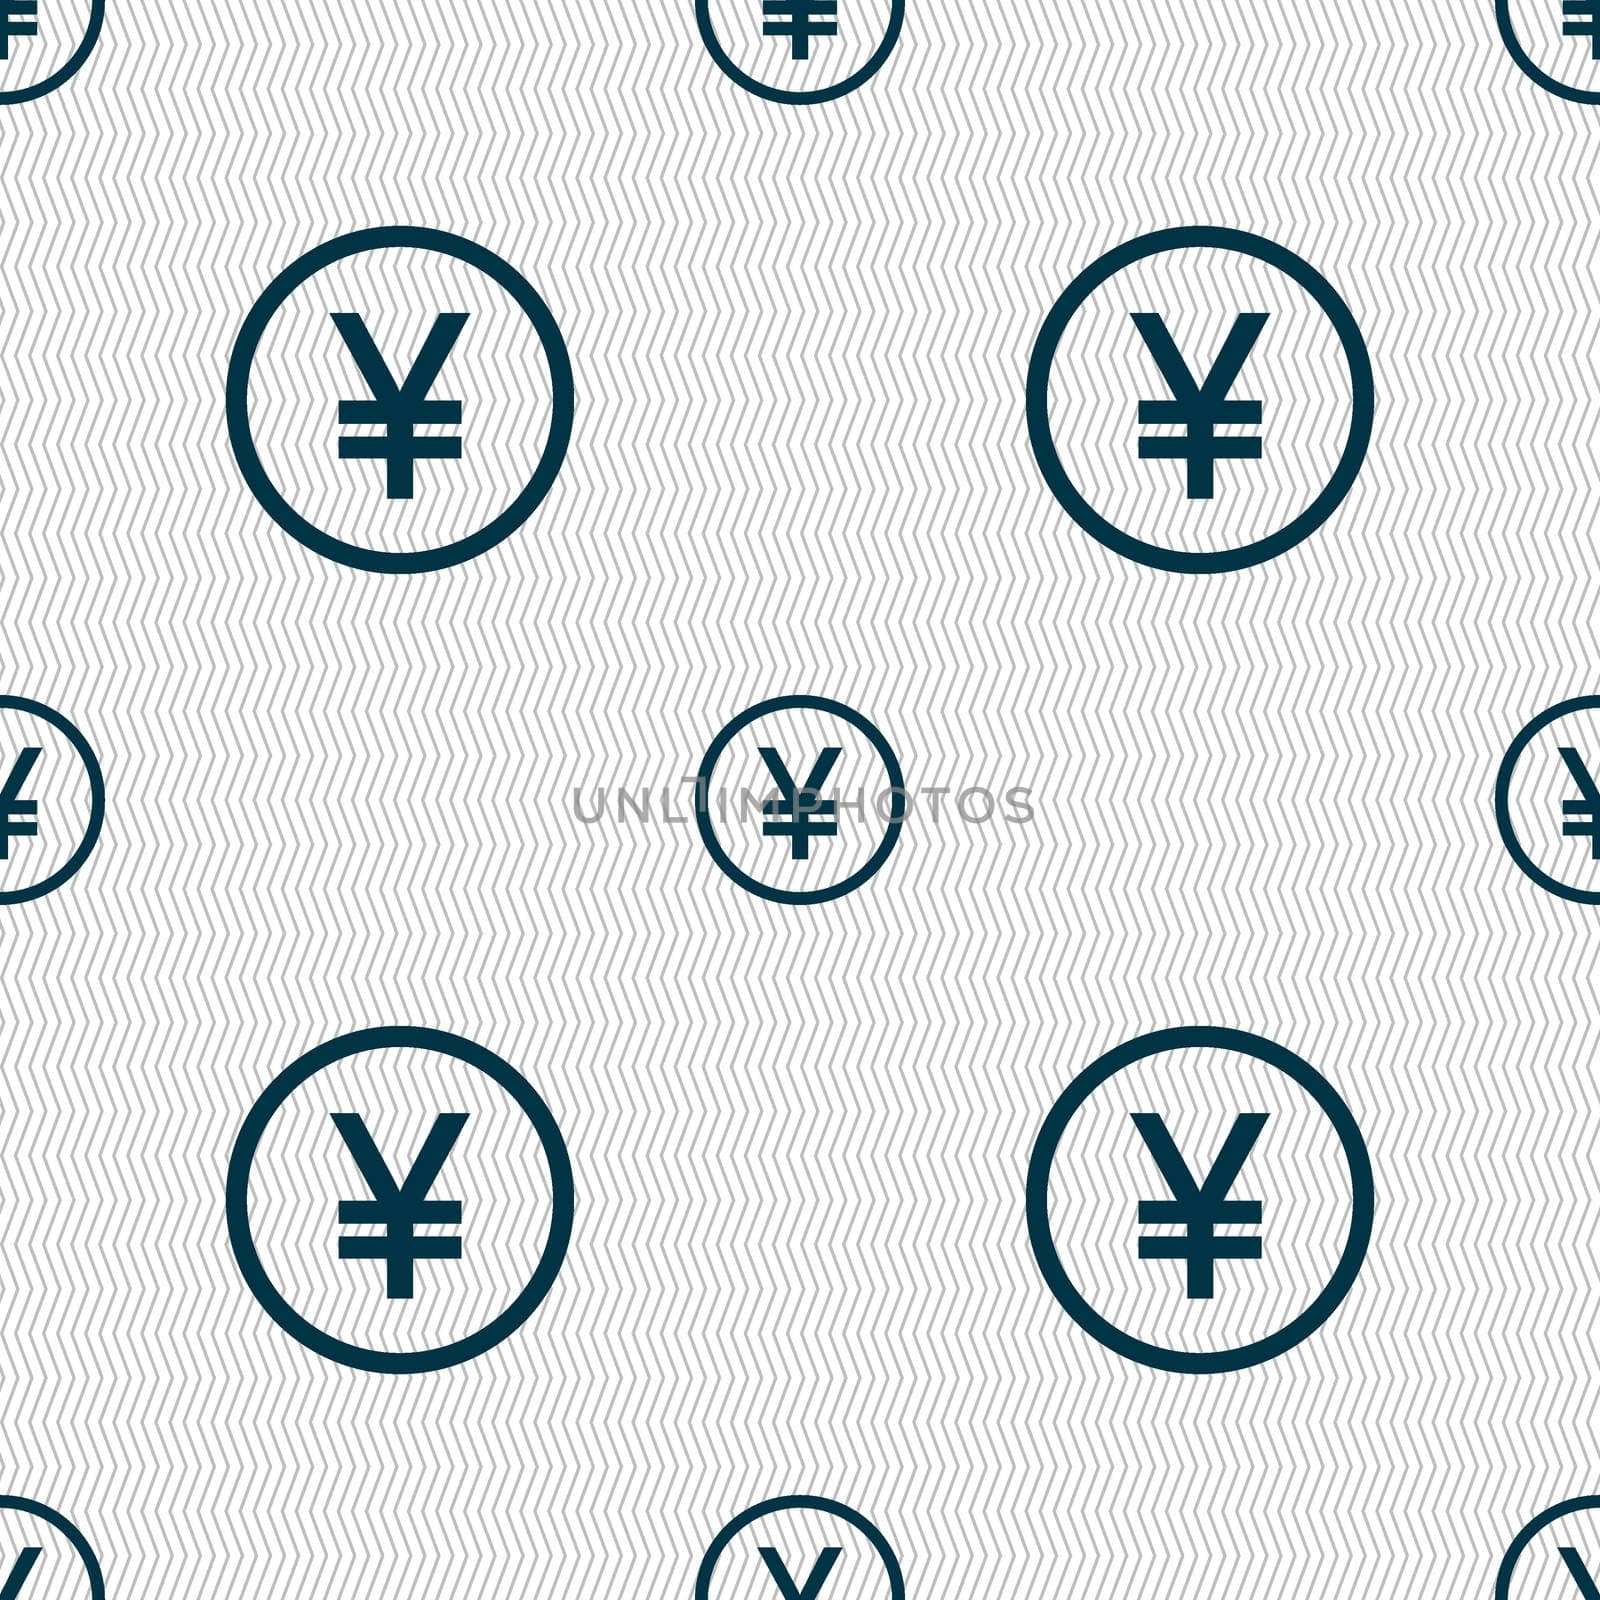 Japanese Yuan icon sign. Seamless abstract background with geometric shapes. illustration